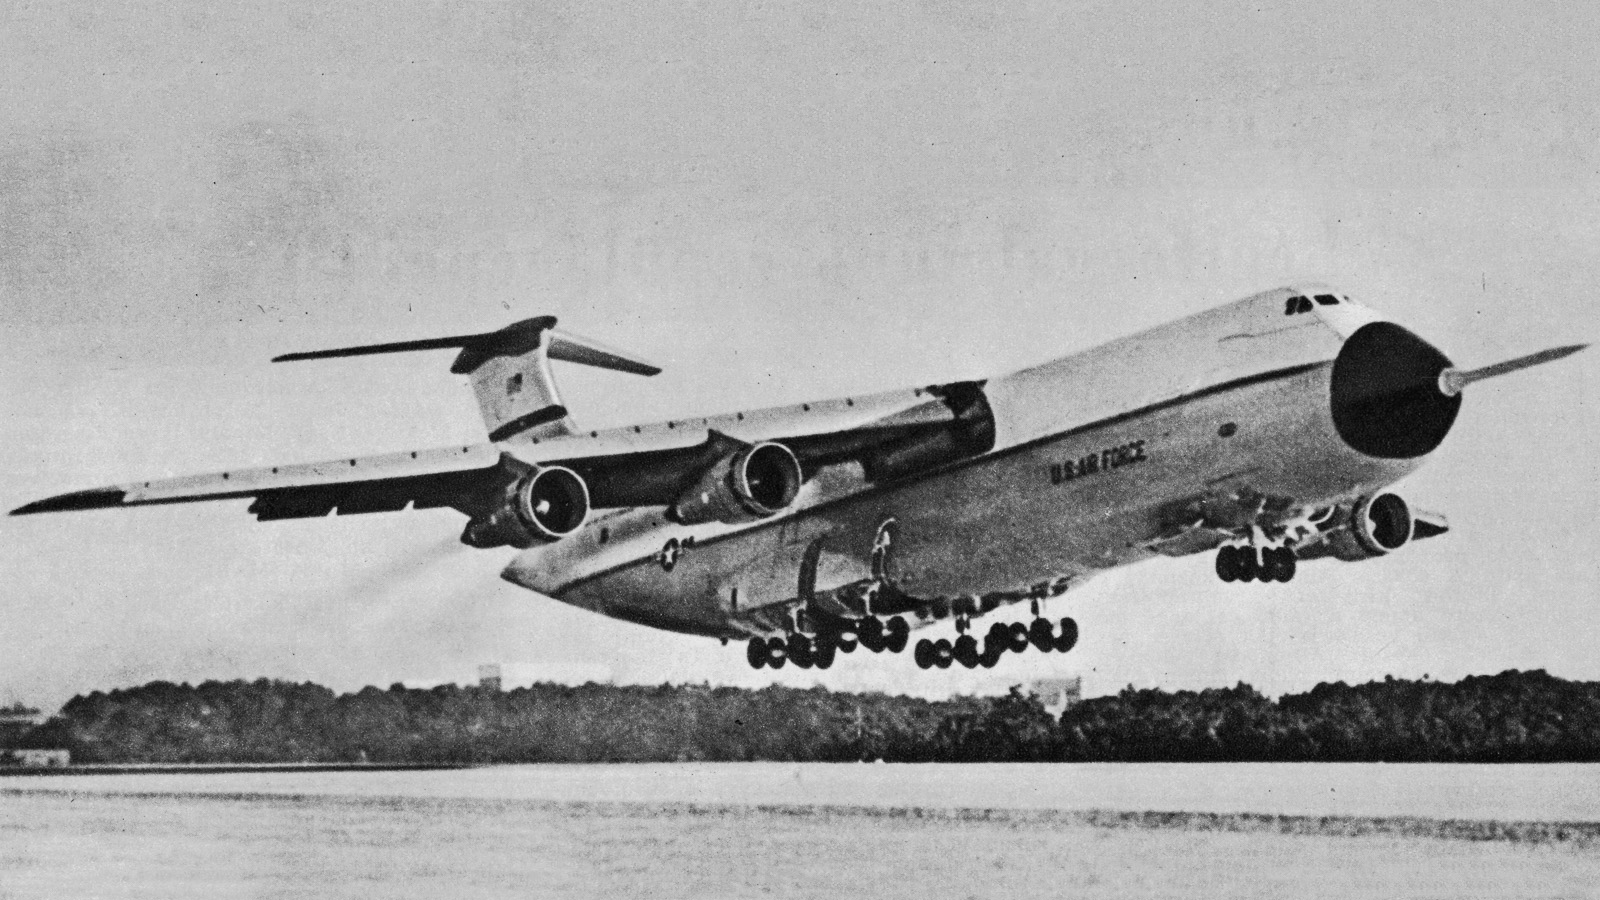 27 Of The Most Eye-Popping Cargo Aircraft Ever Built